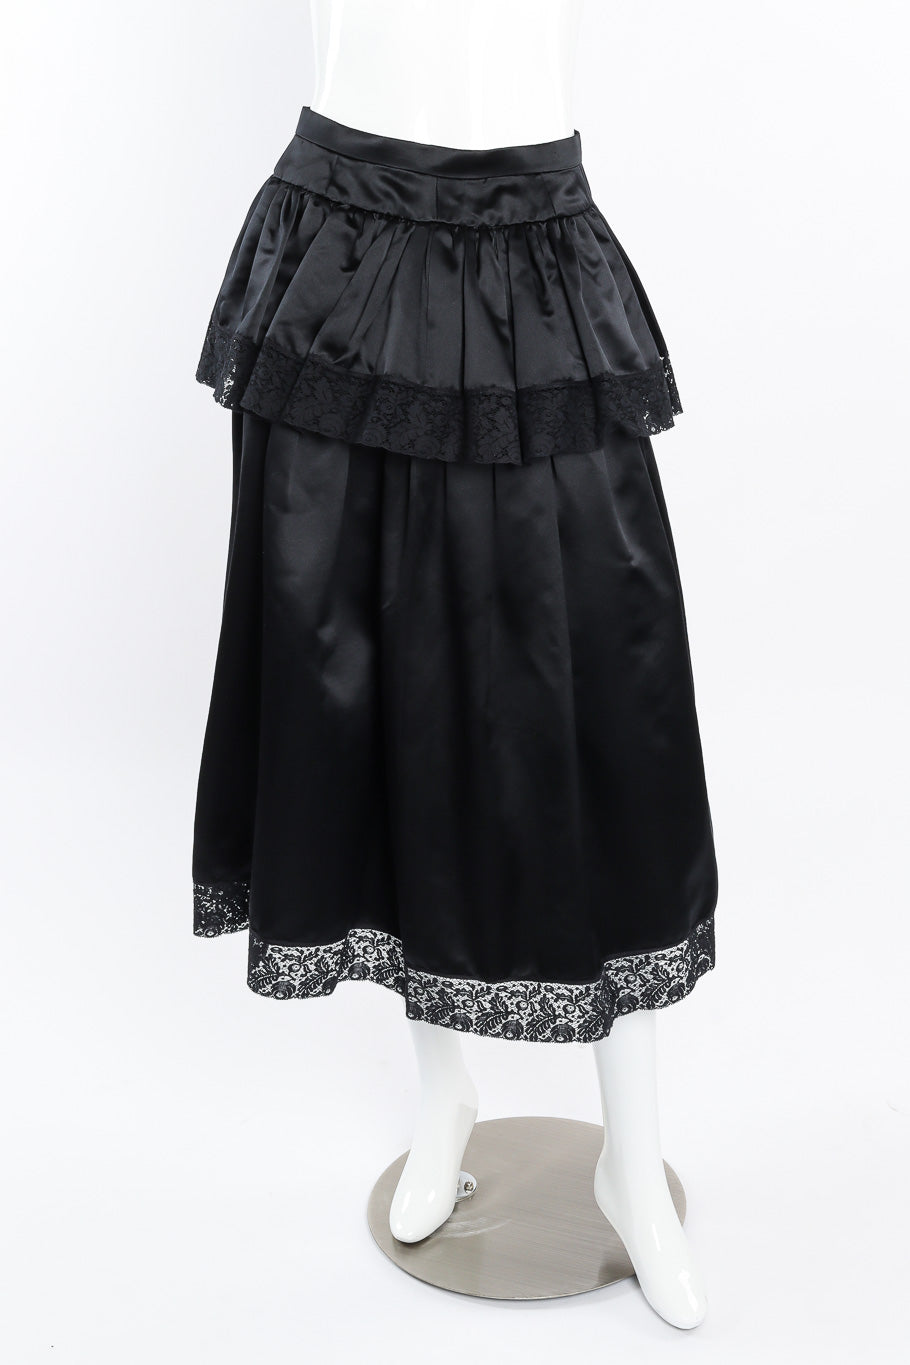 Valentino ruffle lace tiered skirt on mannequin @recessla